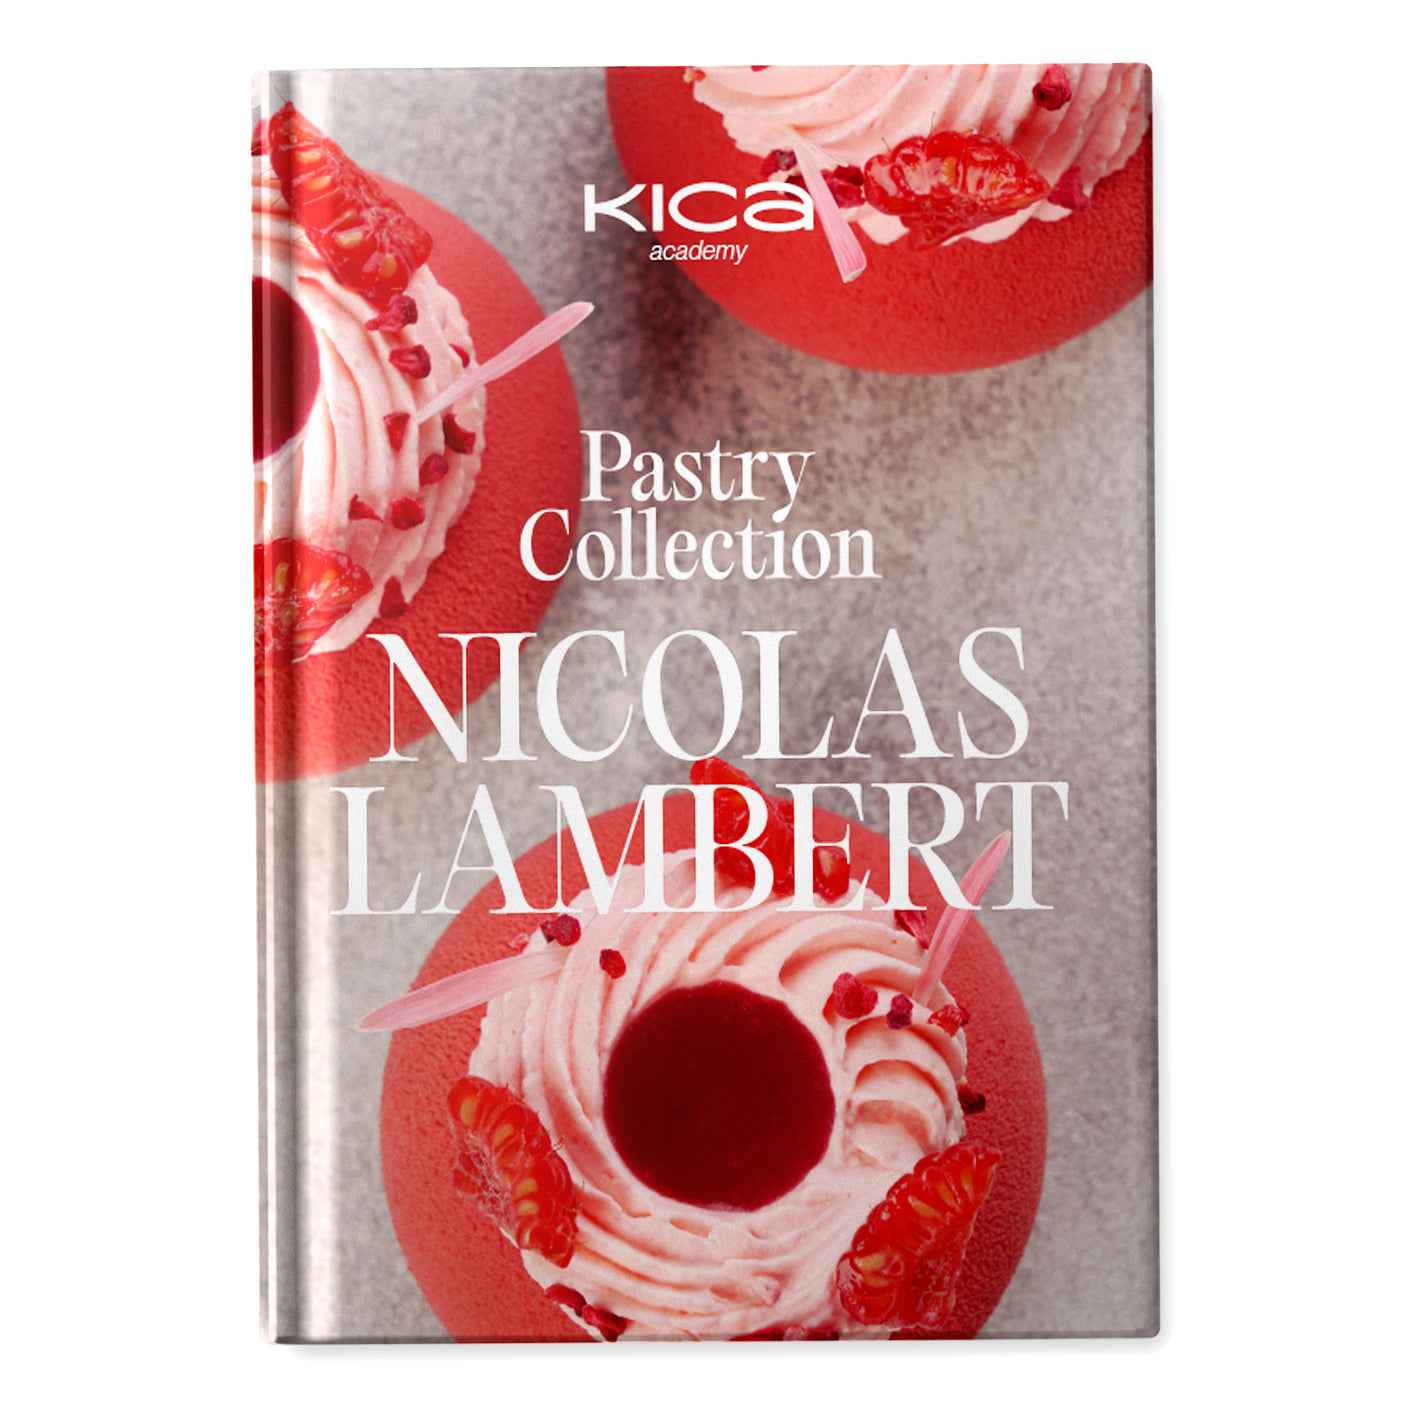 Pastry Collection by Nicolas Lambert